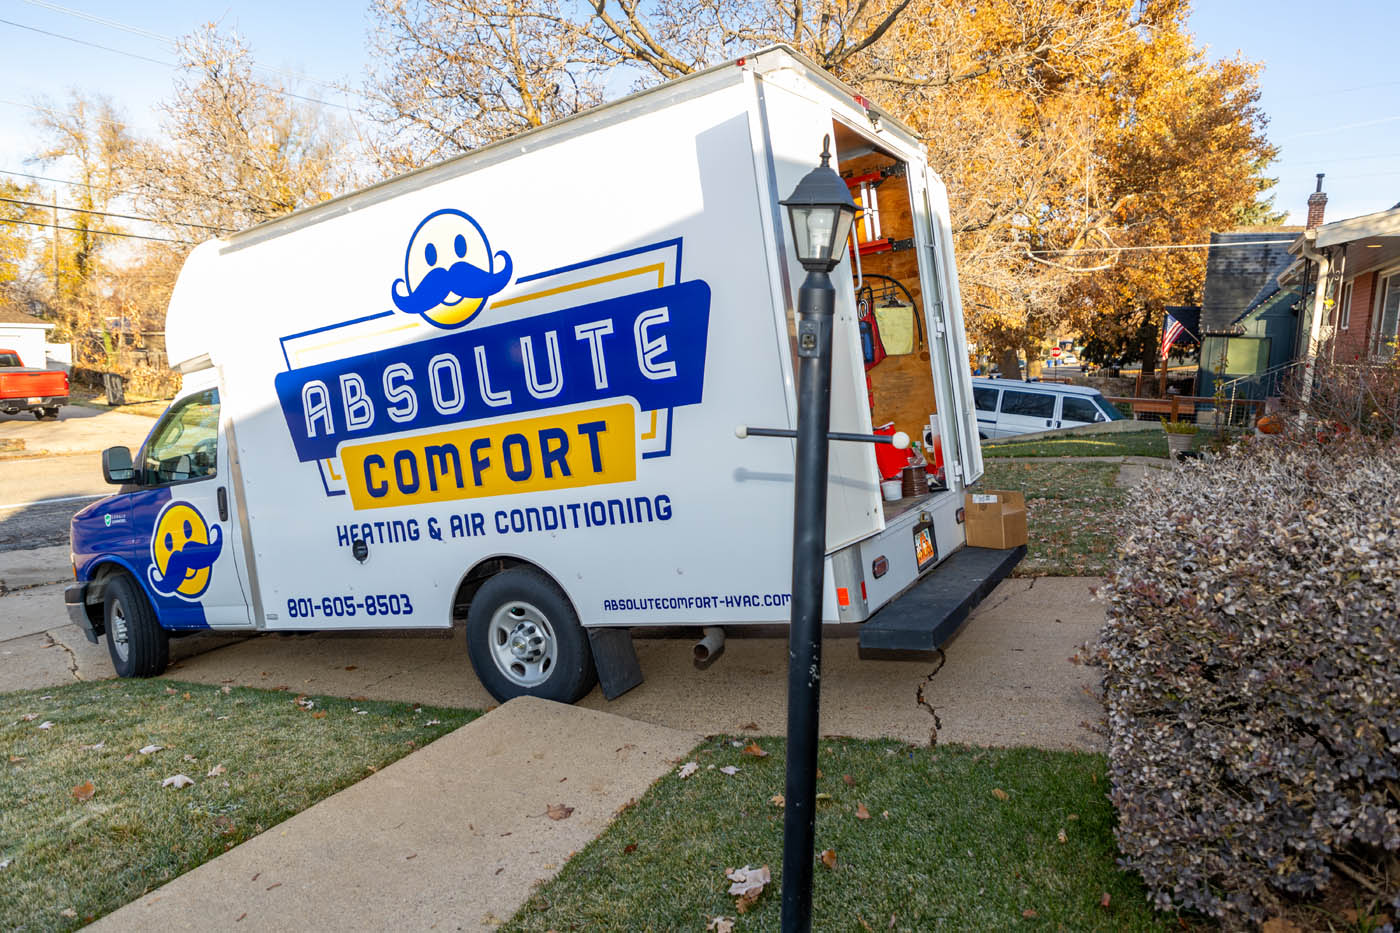 A Absolute Comfort Heating and Air Conditioning truck - ready to learn why we're one of the best hvac companies.